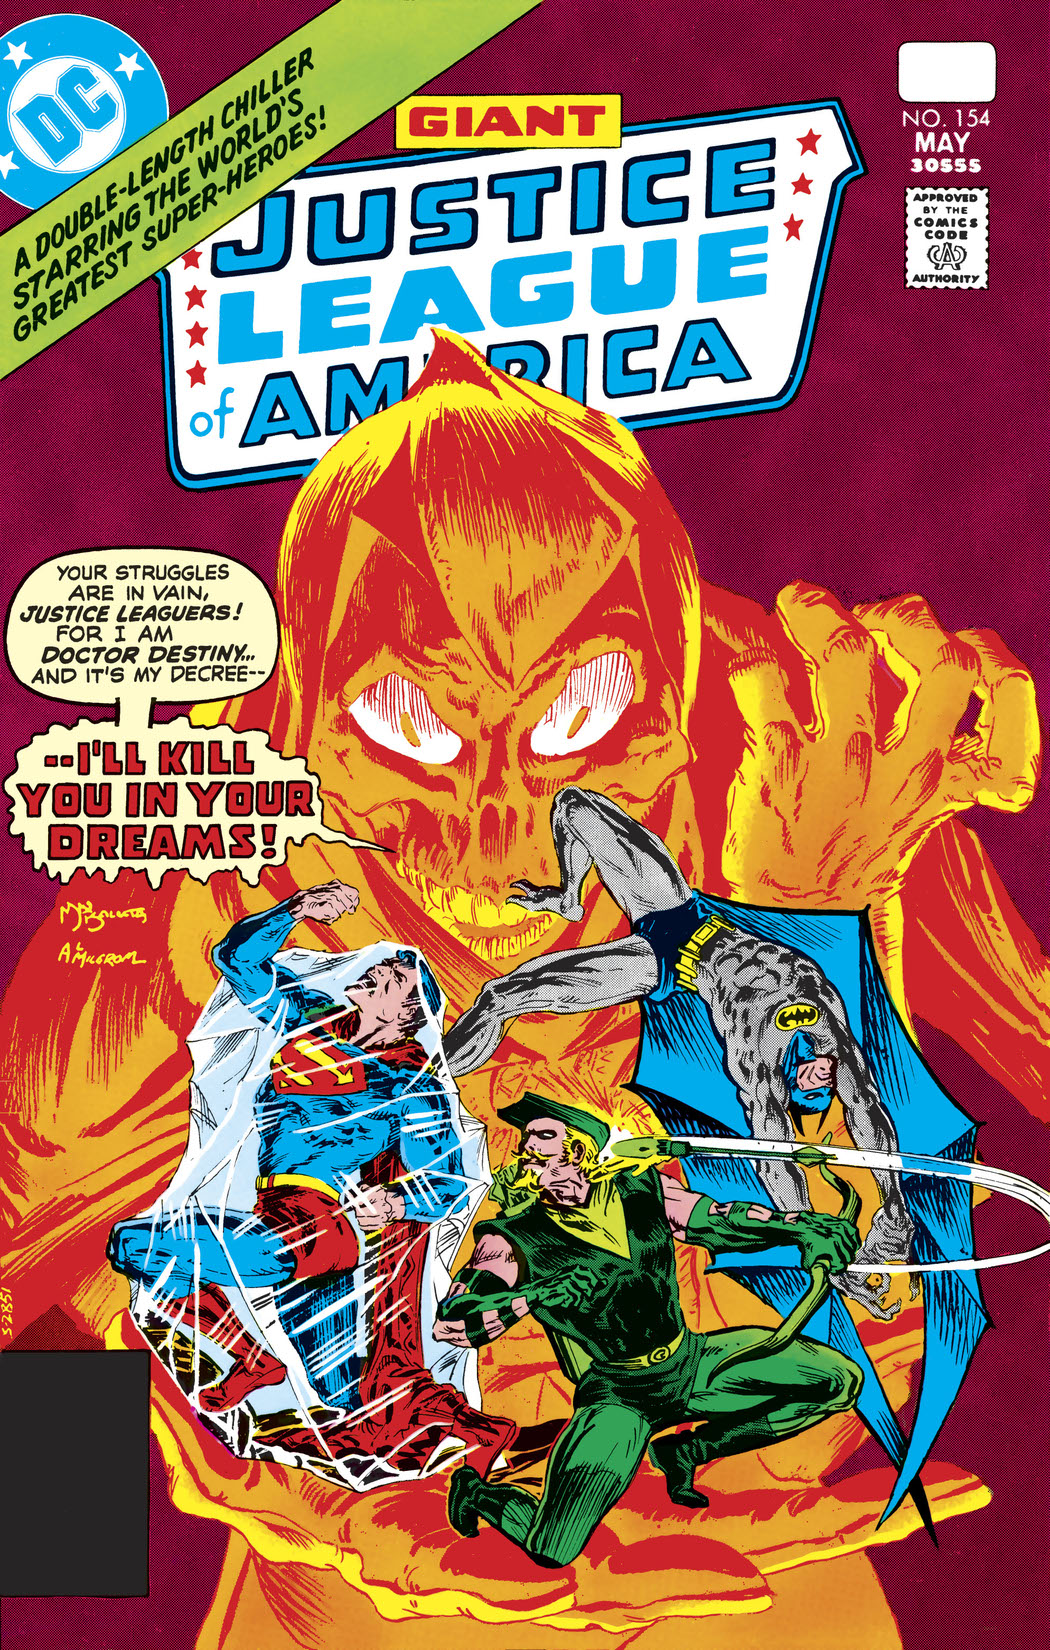 Justice League of America (1960-) #154 preview images